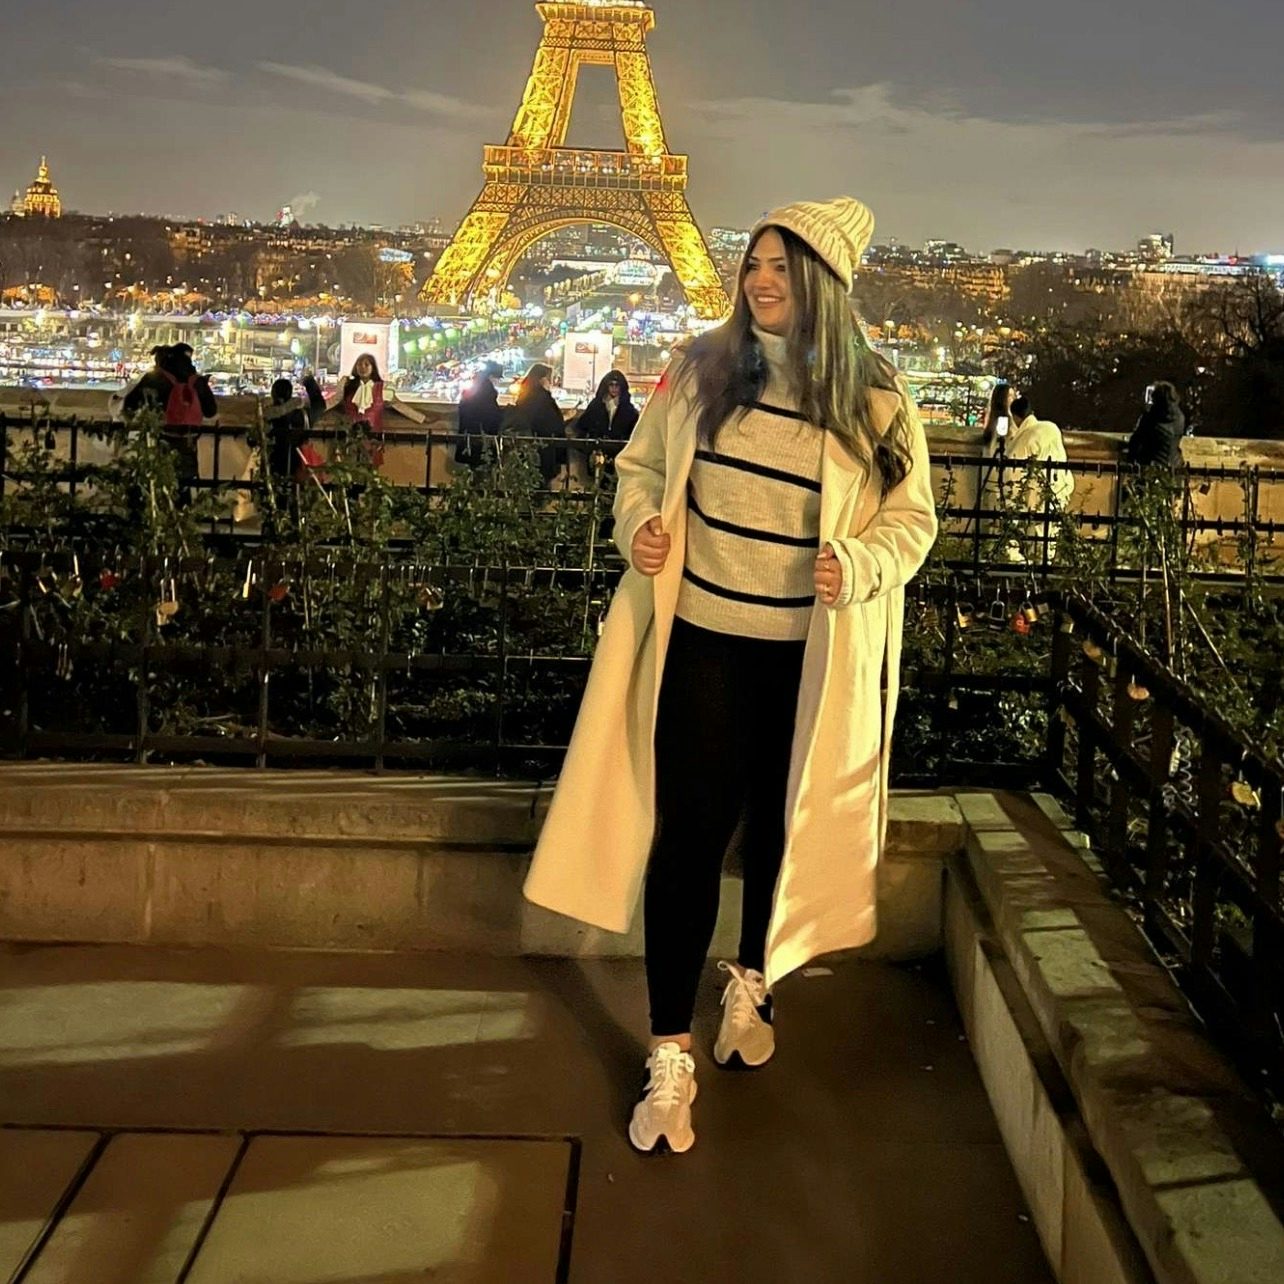 Riva Hanna in a white coat posing at night in front with the Eiffel Tower in view